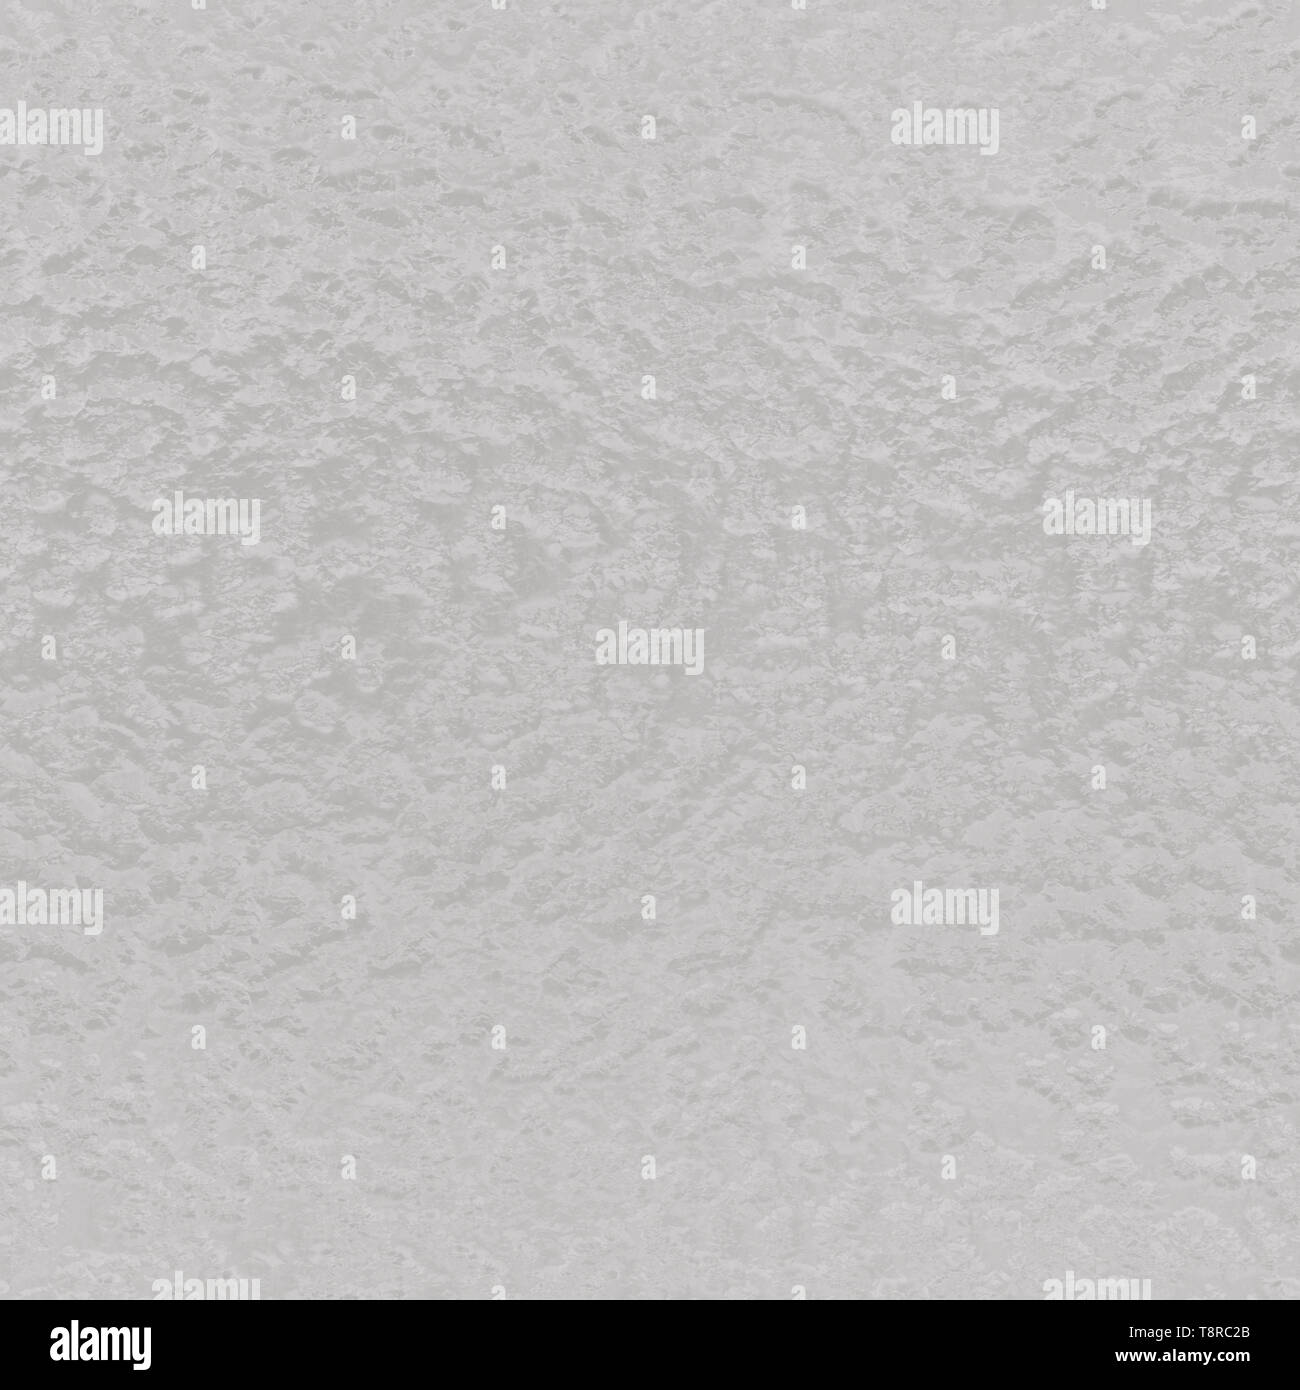 Frosted Glass Seamless Texture Tile Stock Photo